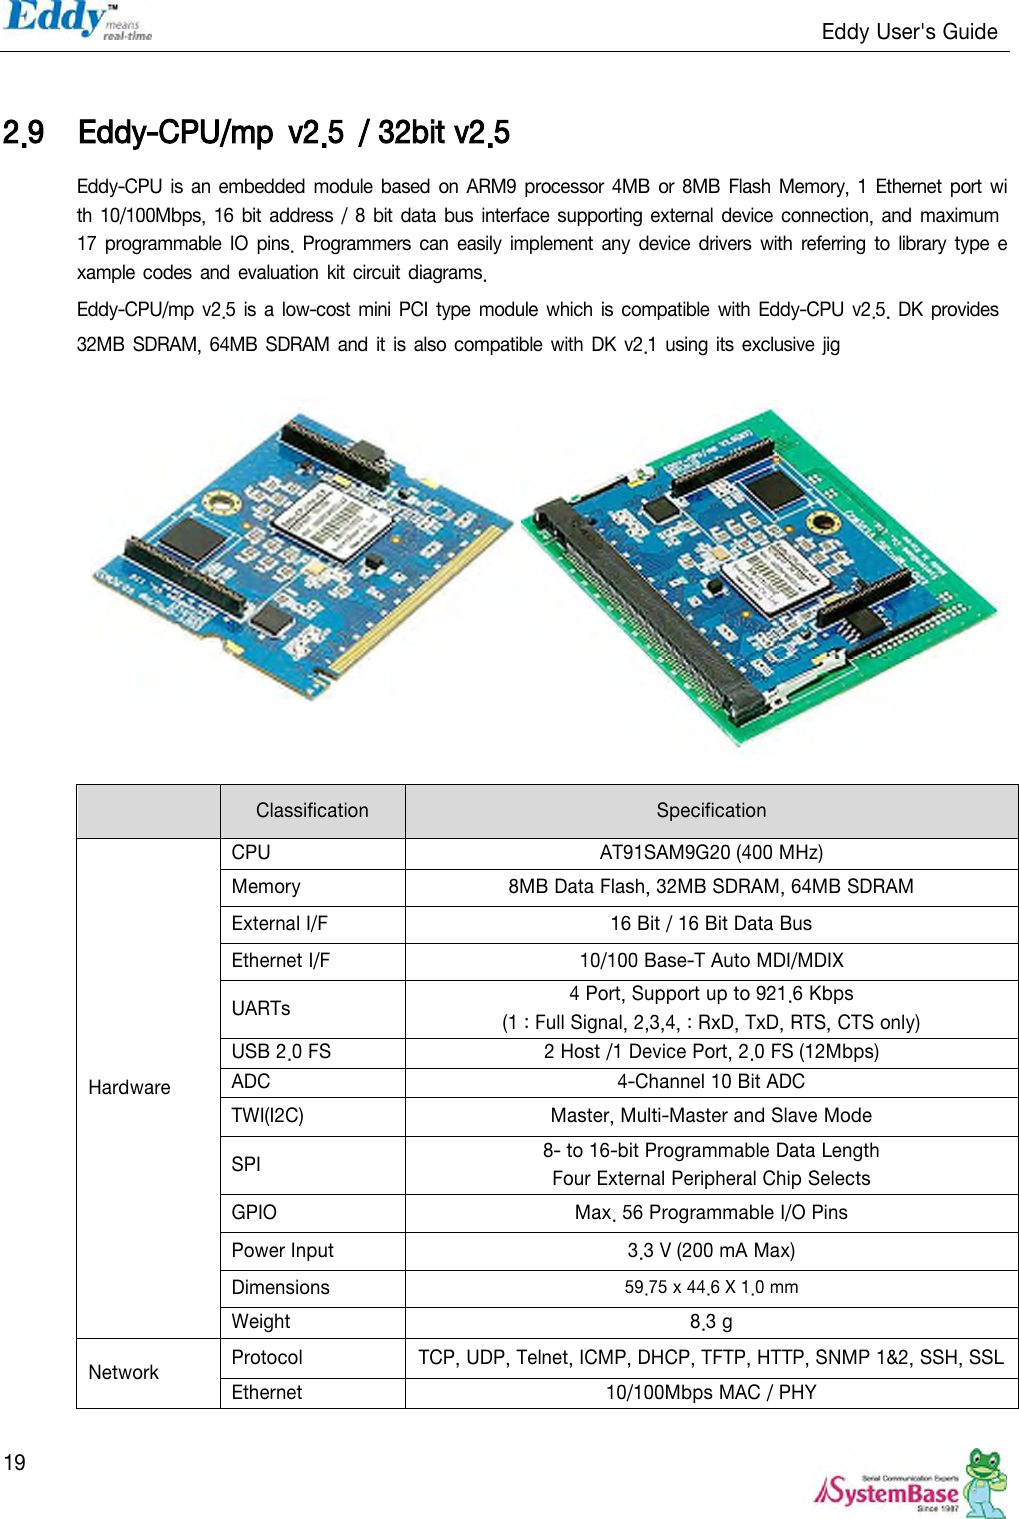                                                                   Eddy User&apos;s Guide   19  2.9 Eddy-CPU/mp  v2.5  / 32bit v2.5 Eddy-CPU  is an embedded module based  on ARM9 processor 4MB or 8MB Flash  Memory,  1 Ethernet  port with 10/100Mbps,  16 bit  address / 8 bit data  bus interface  supporting  external  device connection, and maximum 17 programmable IO pins. Programmers can easily  implement  any  device drivers  with  referring  to  library  type  example codes  and evaluation  kit circuit  diagrams. Eddy-CPU/mp v2.5  is a low-cost  mini PCI  type  module  which is compatible  with Eddy-CPU  v2.5. DK provides 32MB  SDRAM, 64MB SDRAM and it is also compatible with DK  v2.1 using its exclusive  jig              Classification Specification Hardware CPU AT91SAM9G20 (400 MHz) Memory 8MB Data Flash, 32MB SDRAM, 64MB SDRAM External I/F 16 Bit / 16 Bit Data Bus Ethernet I/F 10/100 Base-T Auto MDI/MDIX UARTs 4 Port, Support up to 921.6 Kbps (1 : Full Signal, 2,3,4, : RxD, TxD, RTS, CTS only) USB 2.0 FS 2 Host /1 Device Port, 2.0 FS (12Mbps) ADC 4-Channel 10 Bit ADC TWI(I2C) Master, Multi-Master and Slave Mode SPI 8- to 16-bit Programmable Data Length Four External Peripheral Chip Selects GPIO Max. 56 Programmable I/O Pins Power Input 3.3 V (200 mA Max) Dimensions 59.75 x 44.6 X 1.0 mm Weight 8.3 g Network Protocol   TCP, UDP, Telnet, ICMP, DHCP, TFTP, HTTP, SNMP 1&amp;2, SSH, SSL Ethernet 10/100Mbps MAC / PHY 